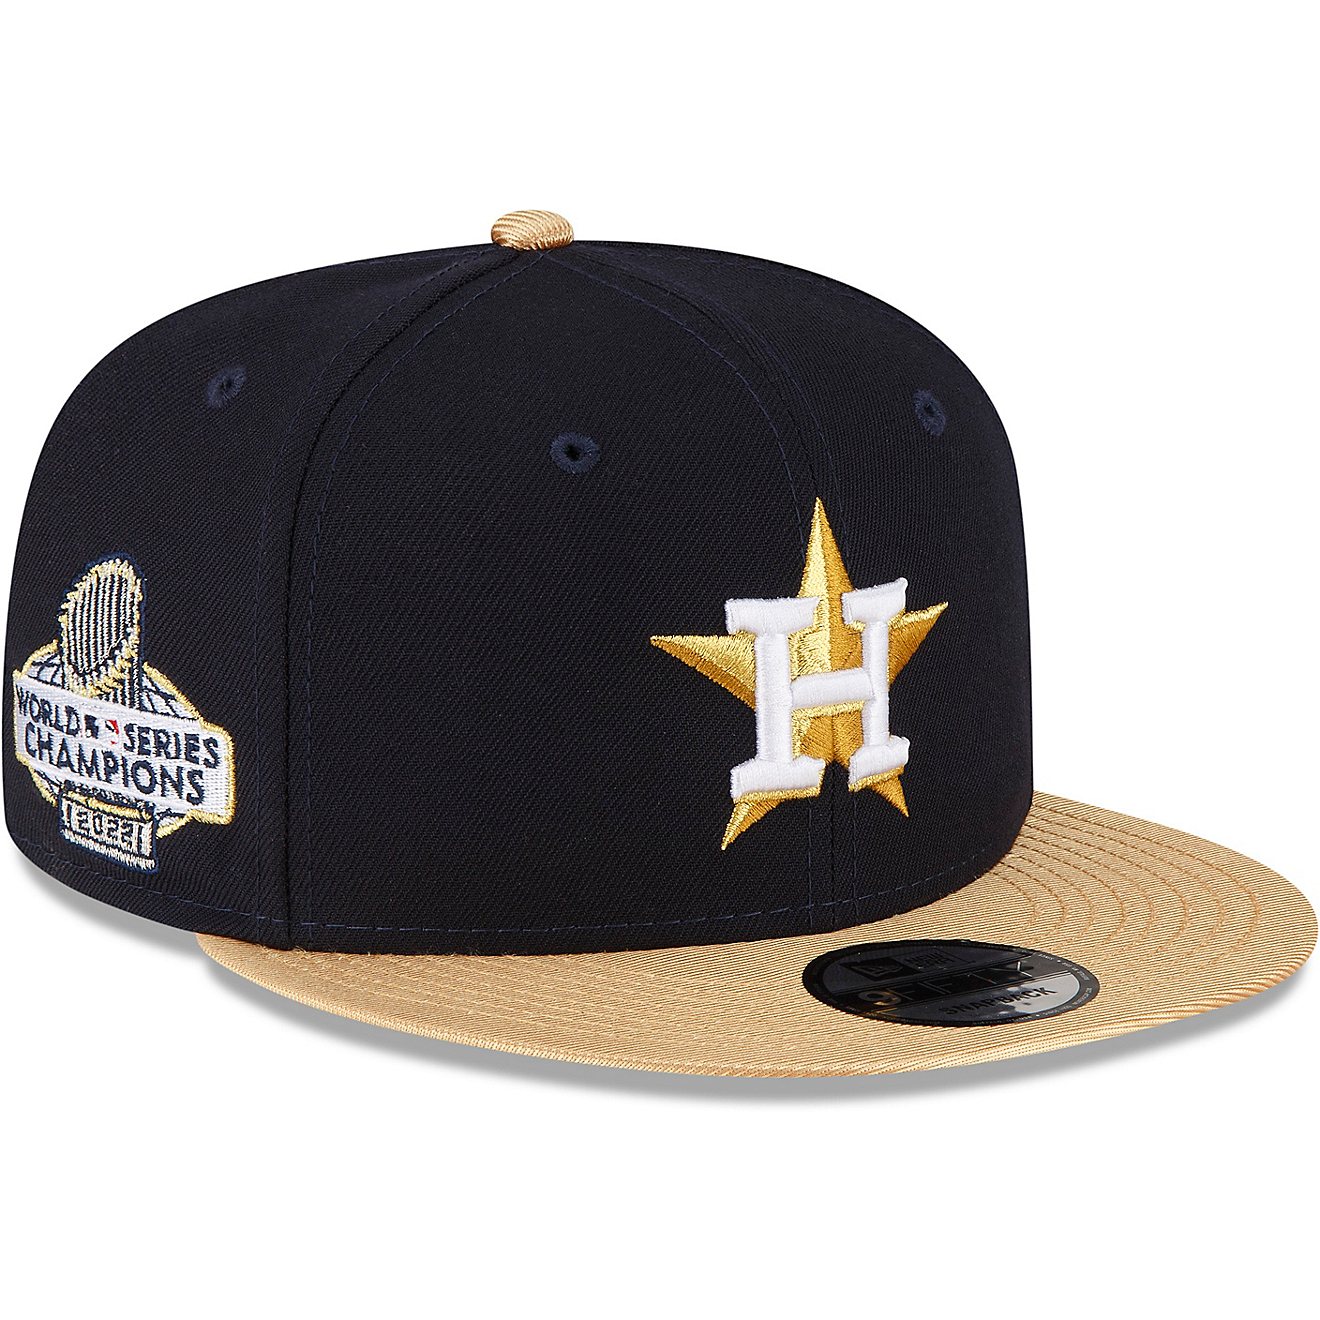 New Era Adults' Houston Astros 9FIFTY WS Champs Gold Collection Cap                                                              - view number 3